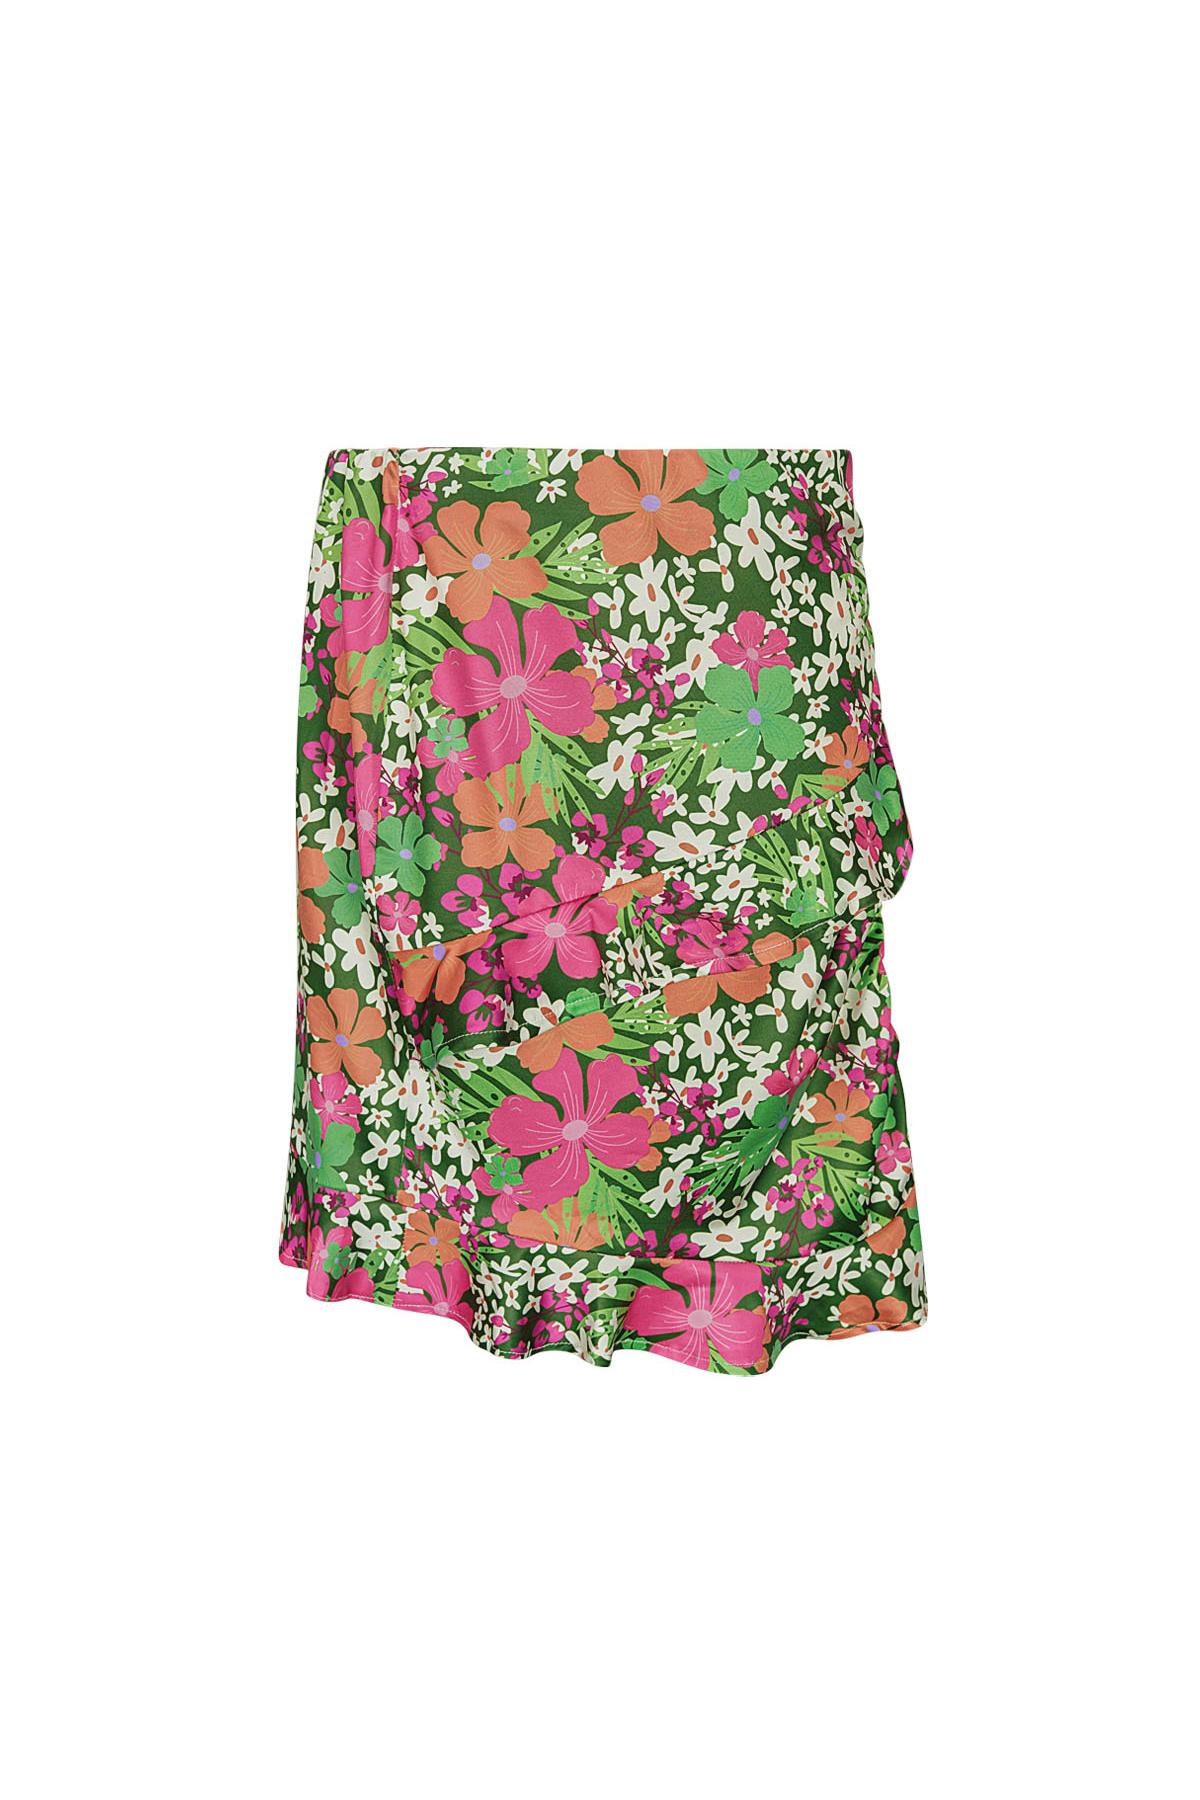 Skirt colorful flowers - green/pink Multi S h5 